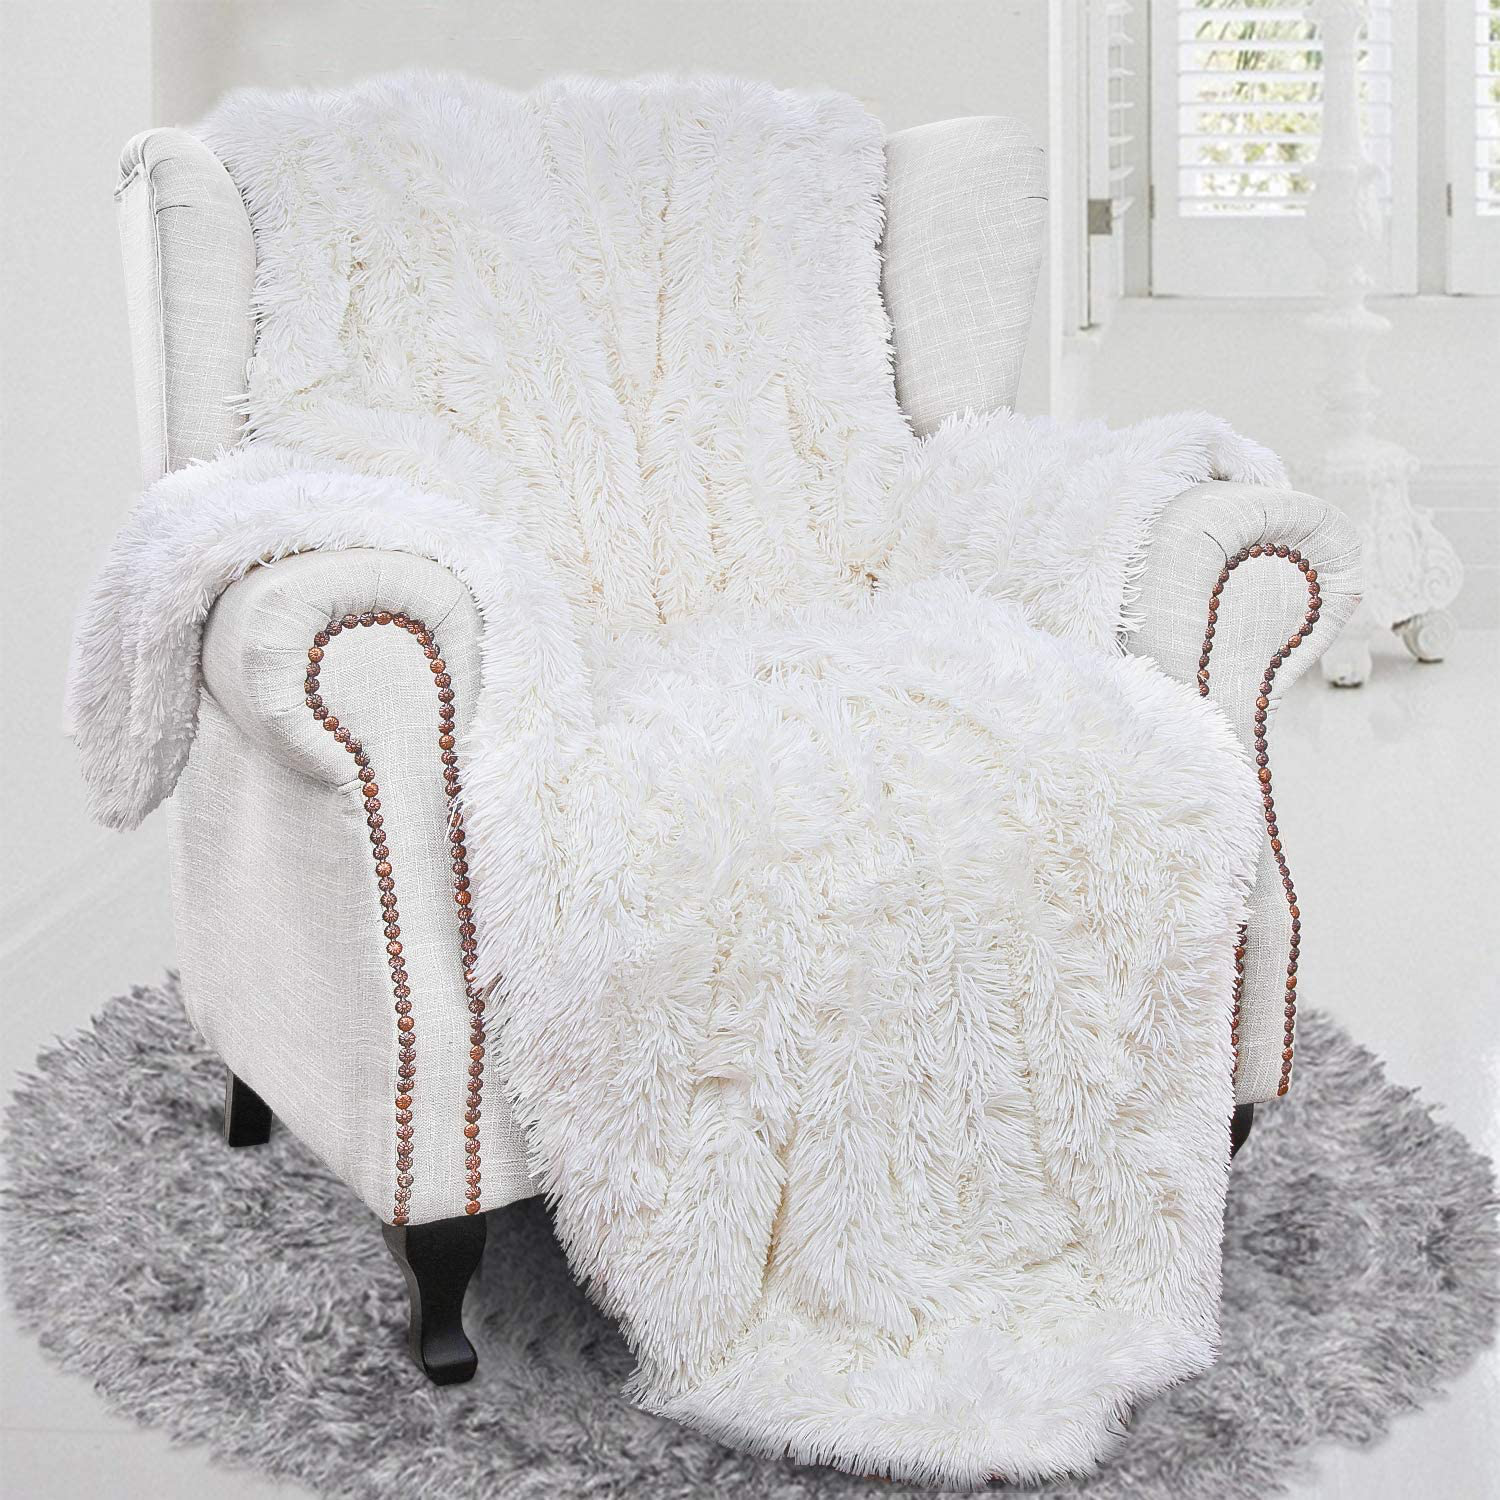 BENRON Plush Throw Blankets, Super Soft Shaggy Fuzzy Sherpa Blankets, Cozy Warm Lightweight Fluffy Faux Fur Blankets for Bed Couch Sofa Photo Props Home Decor, Washable 50''X60'' White